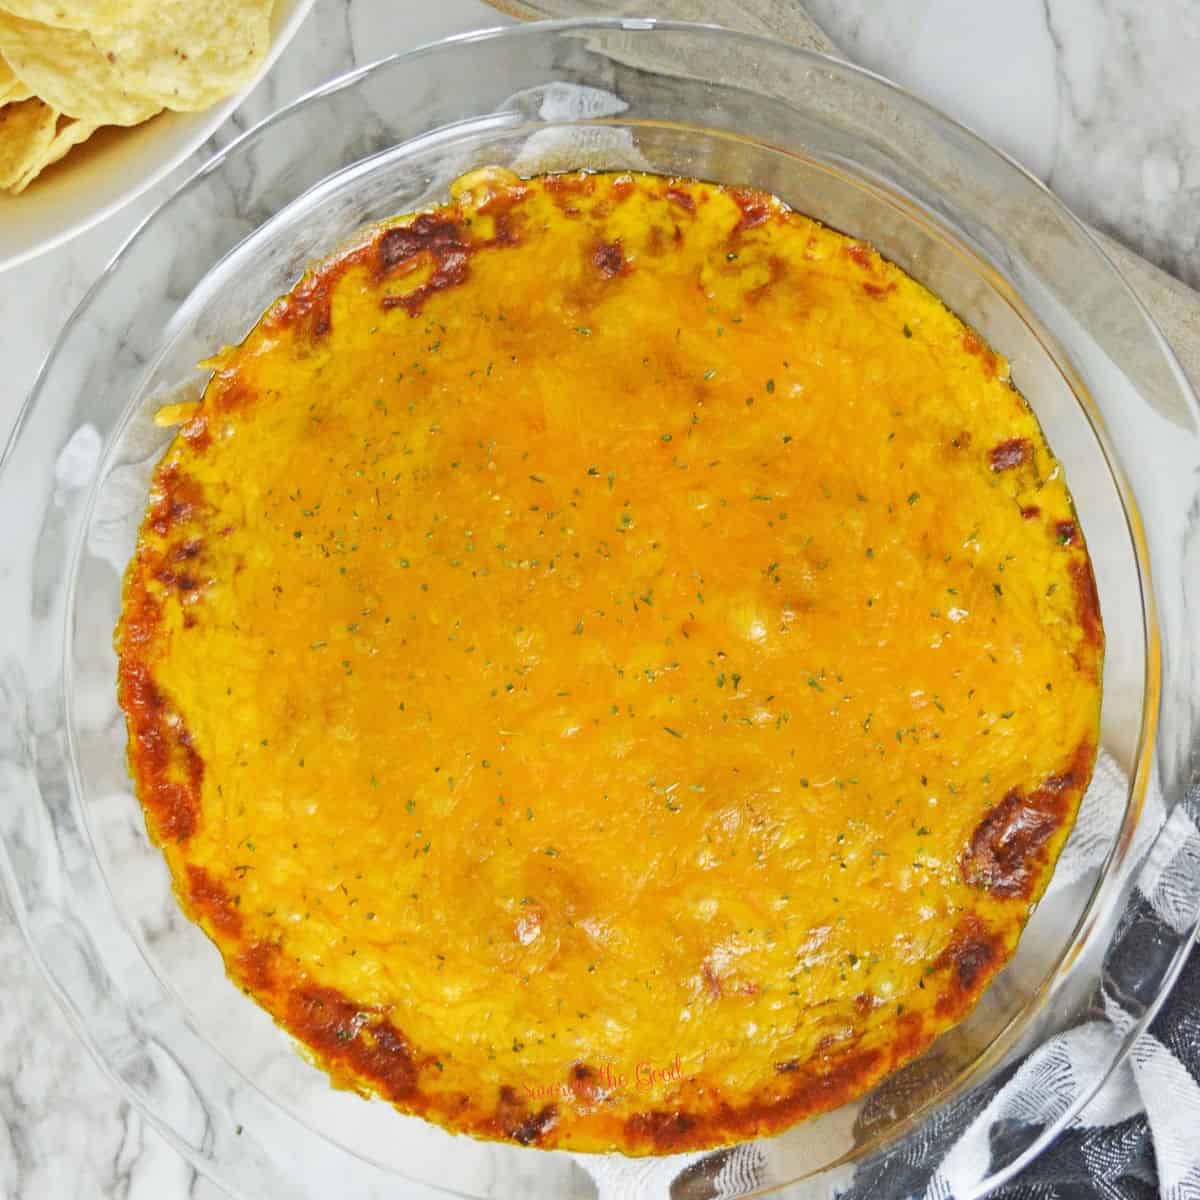 Hormel chili cheese dip in a glass pie plate with chips to the side on a marble like surface.